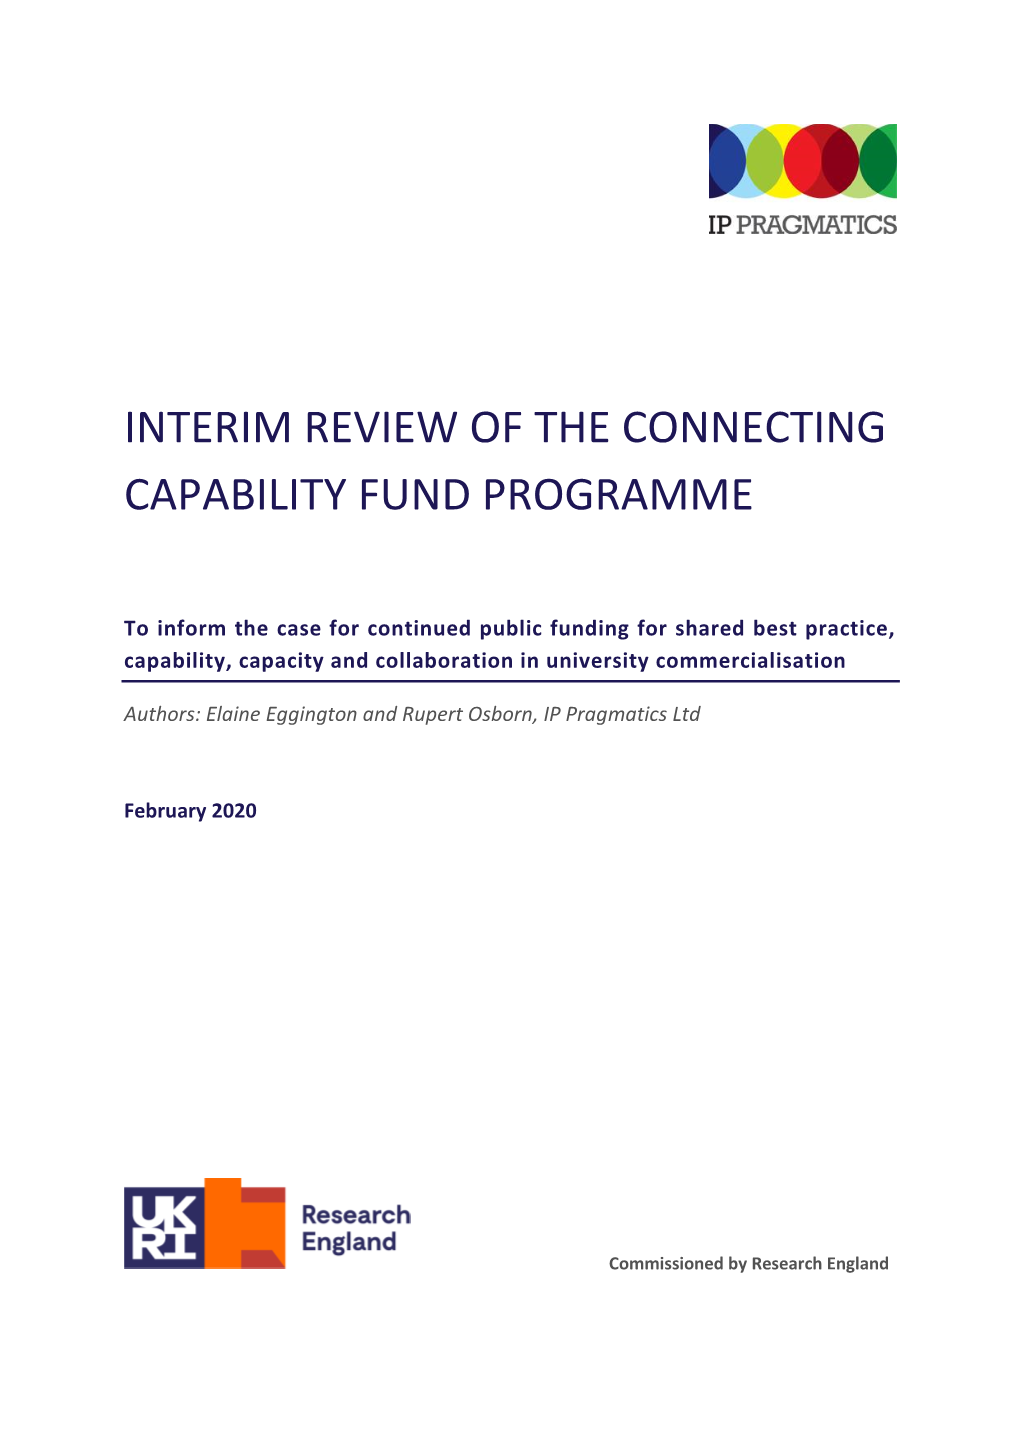 Interim Review of the Connecting Capability Fund Programme